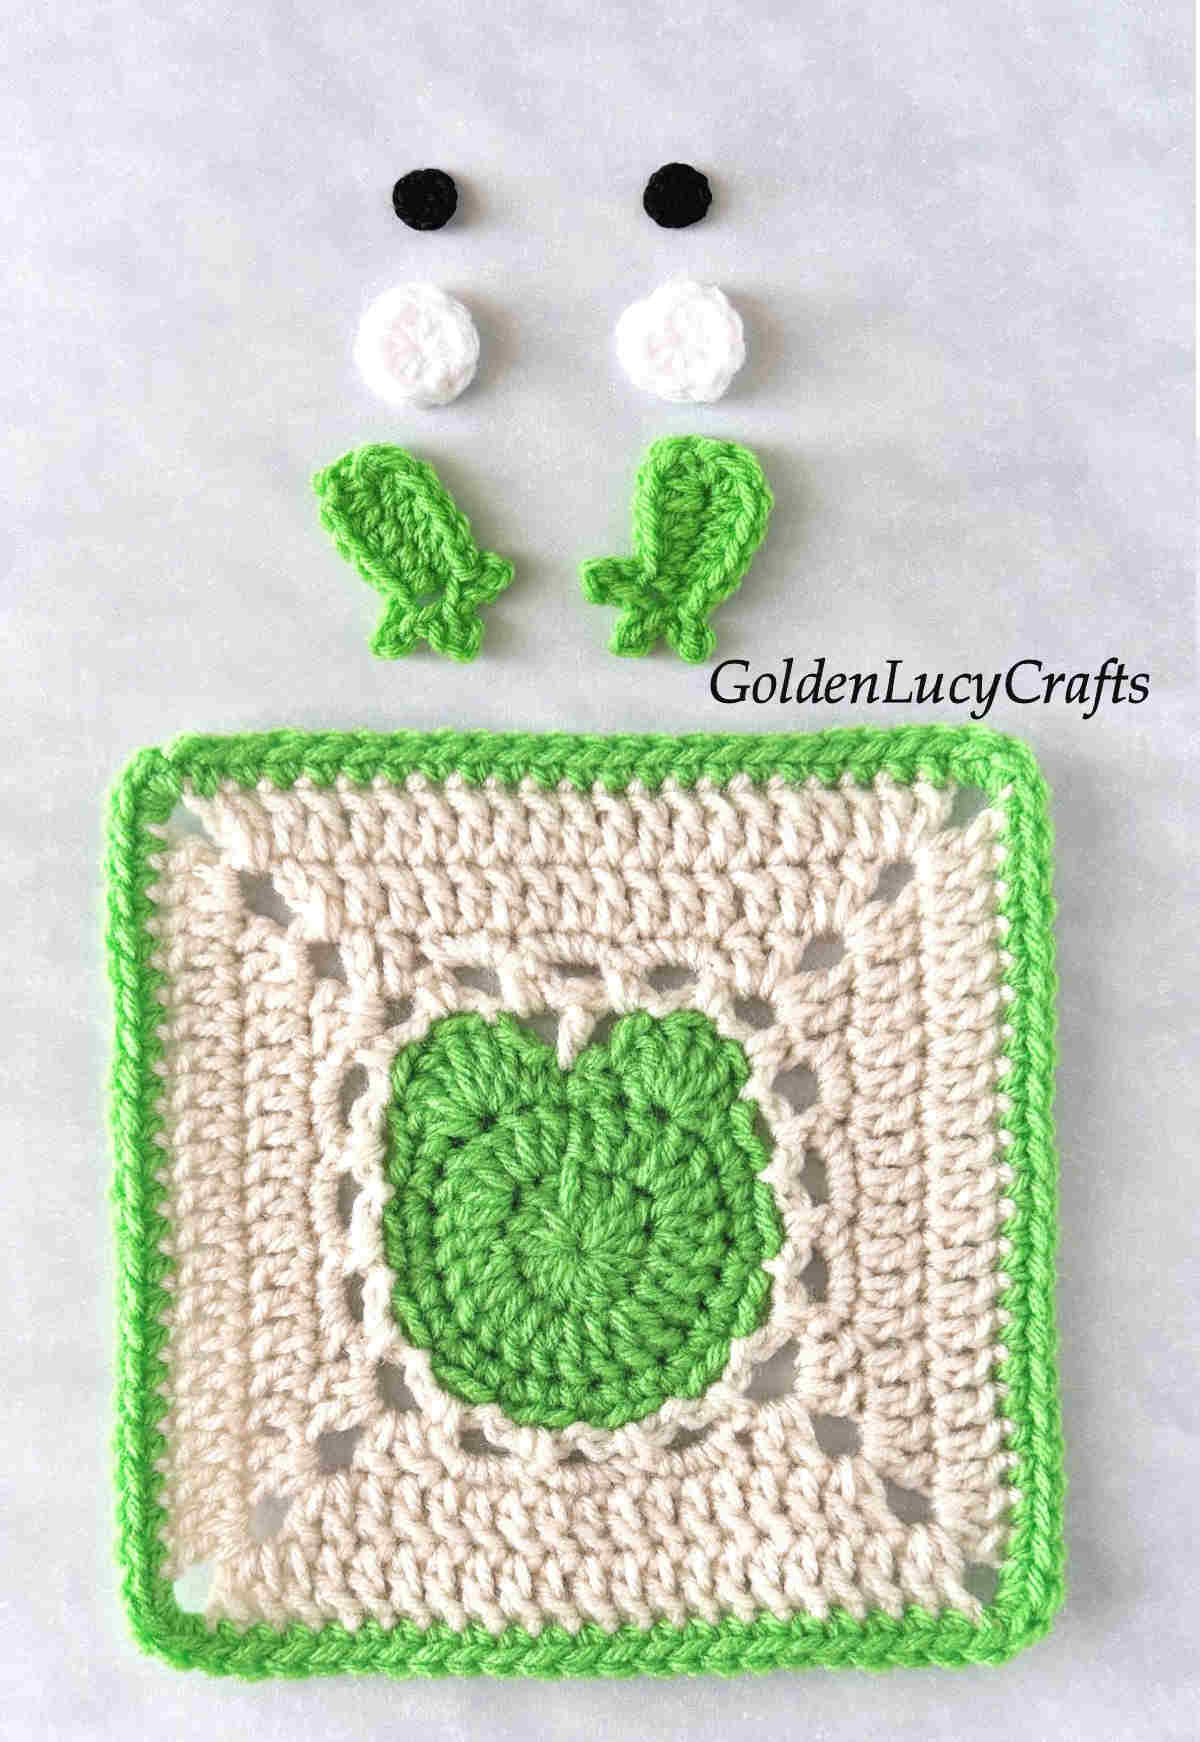 Parts of crocheted frog square.